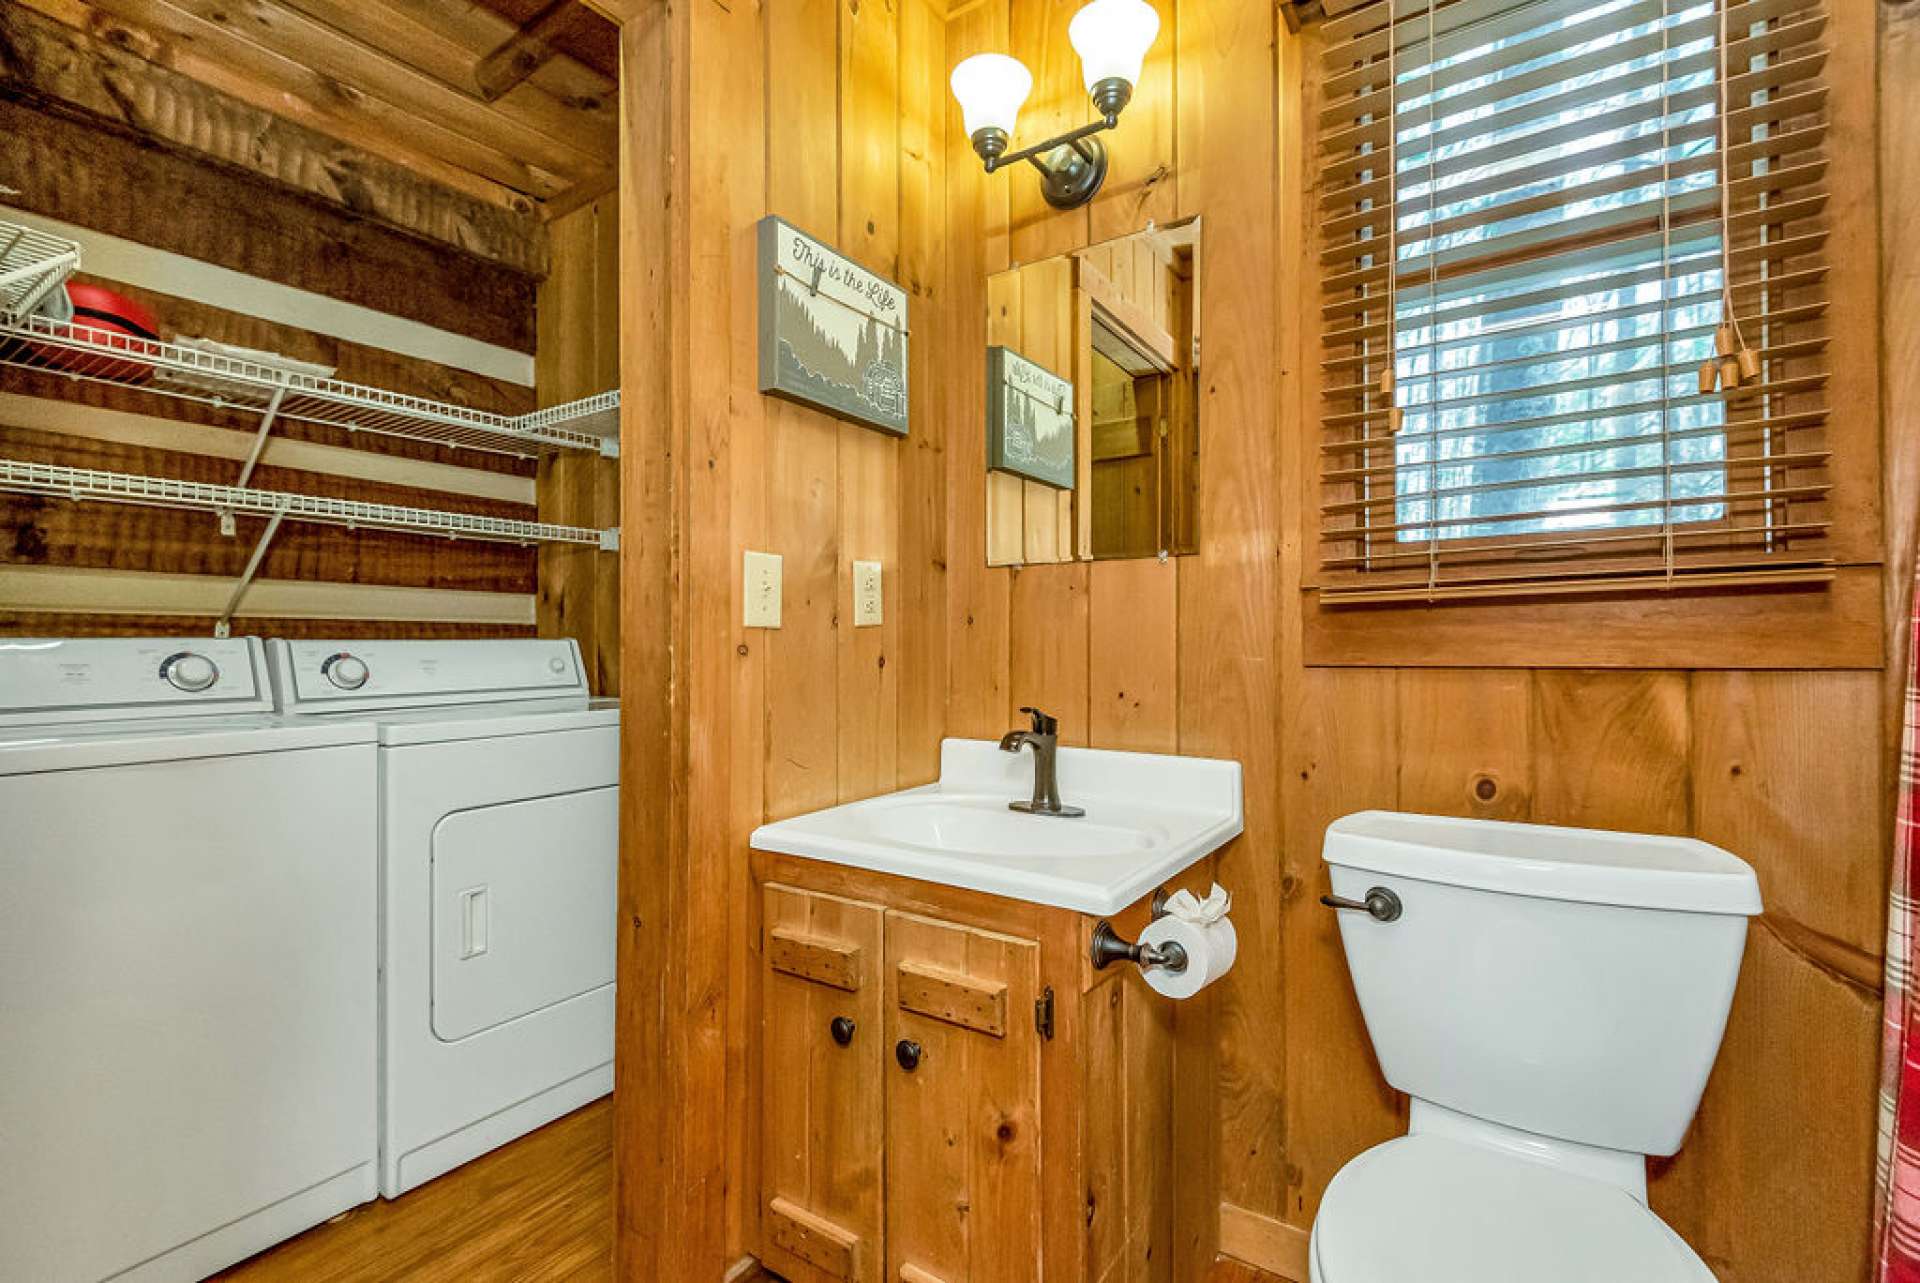 The washer and dryer are conveniently located in the main-level bath.